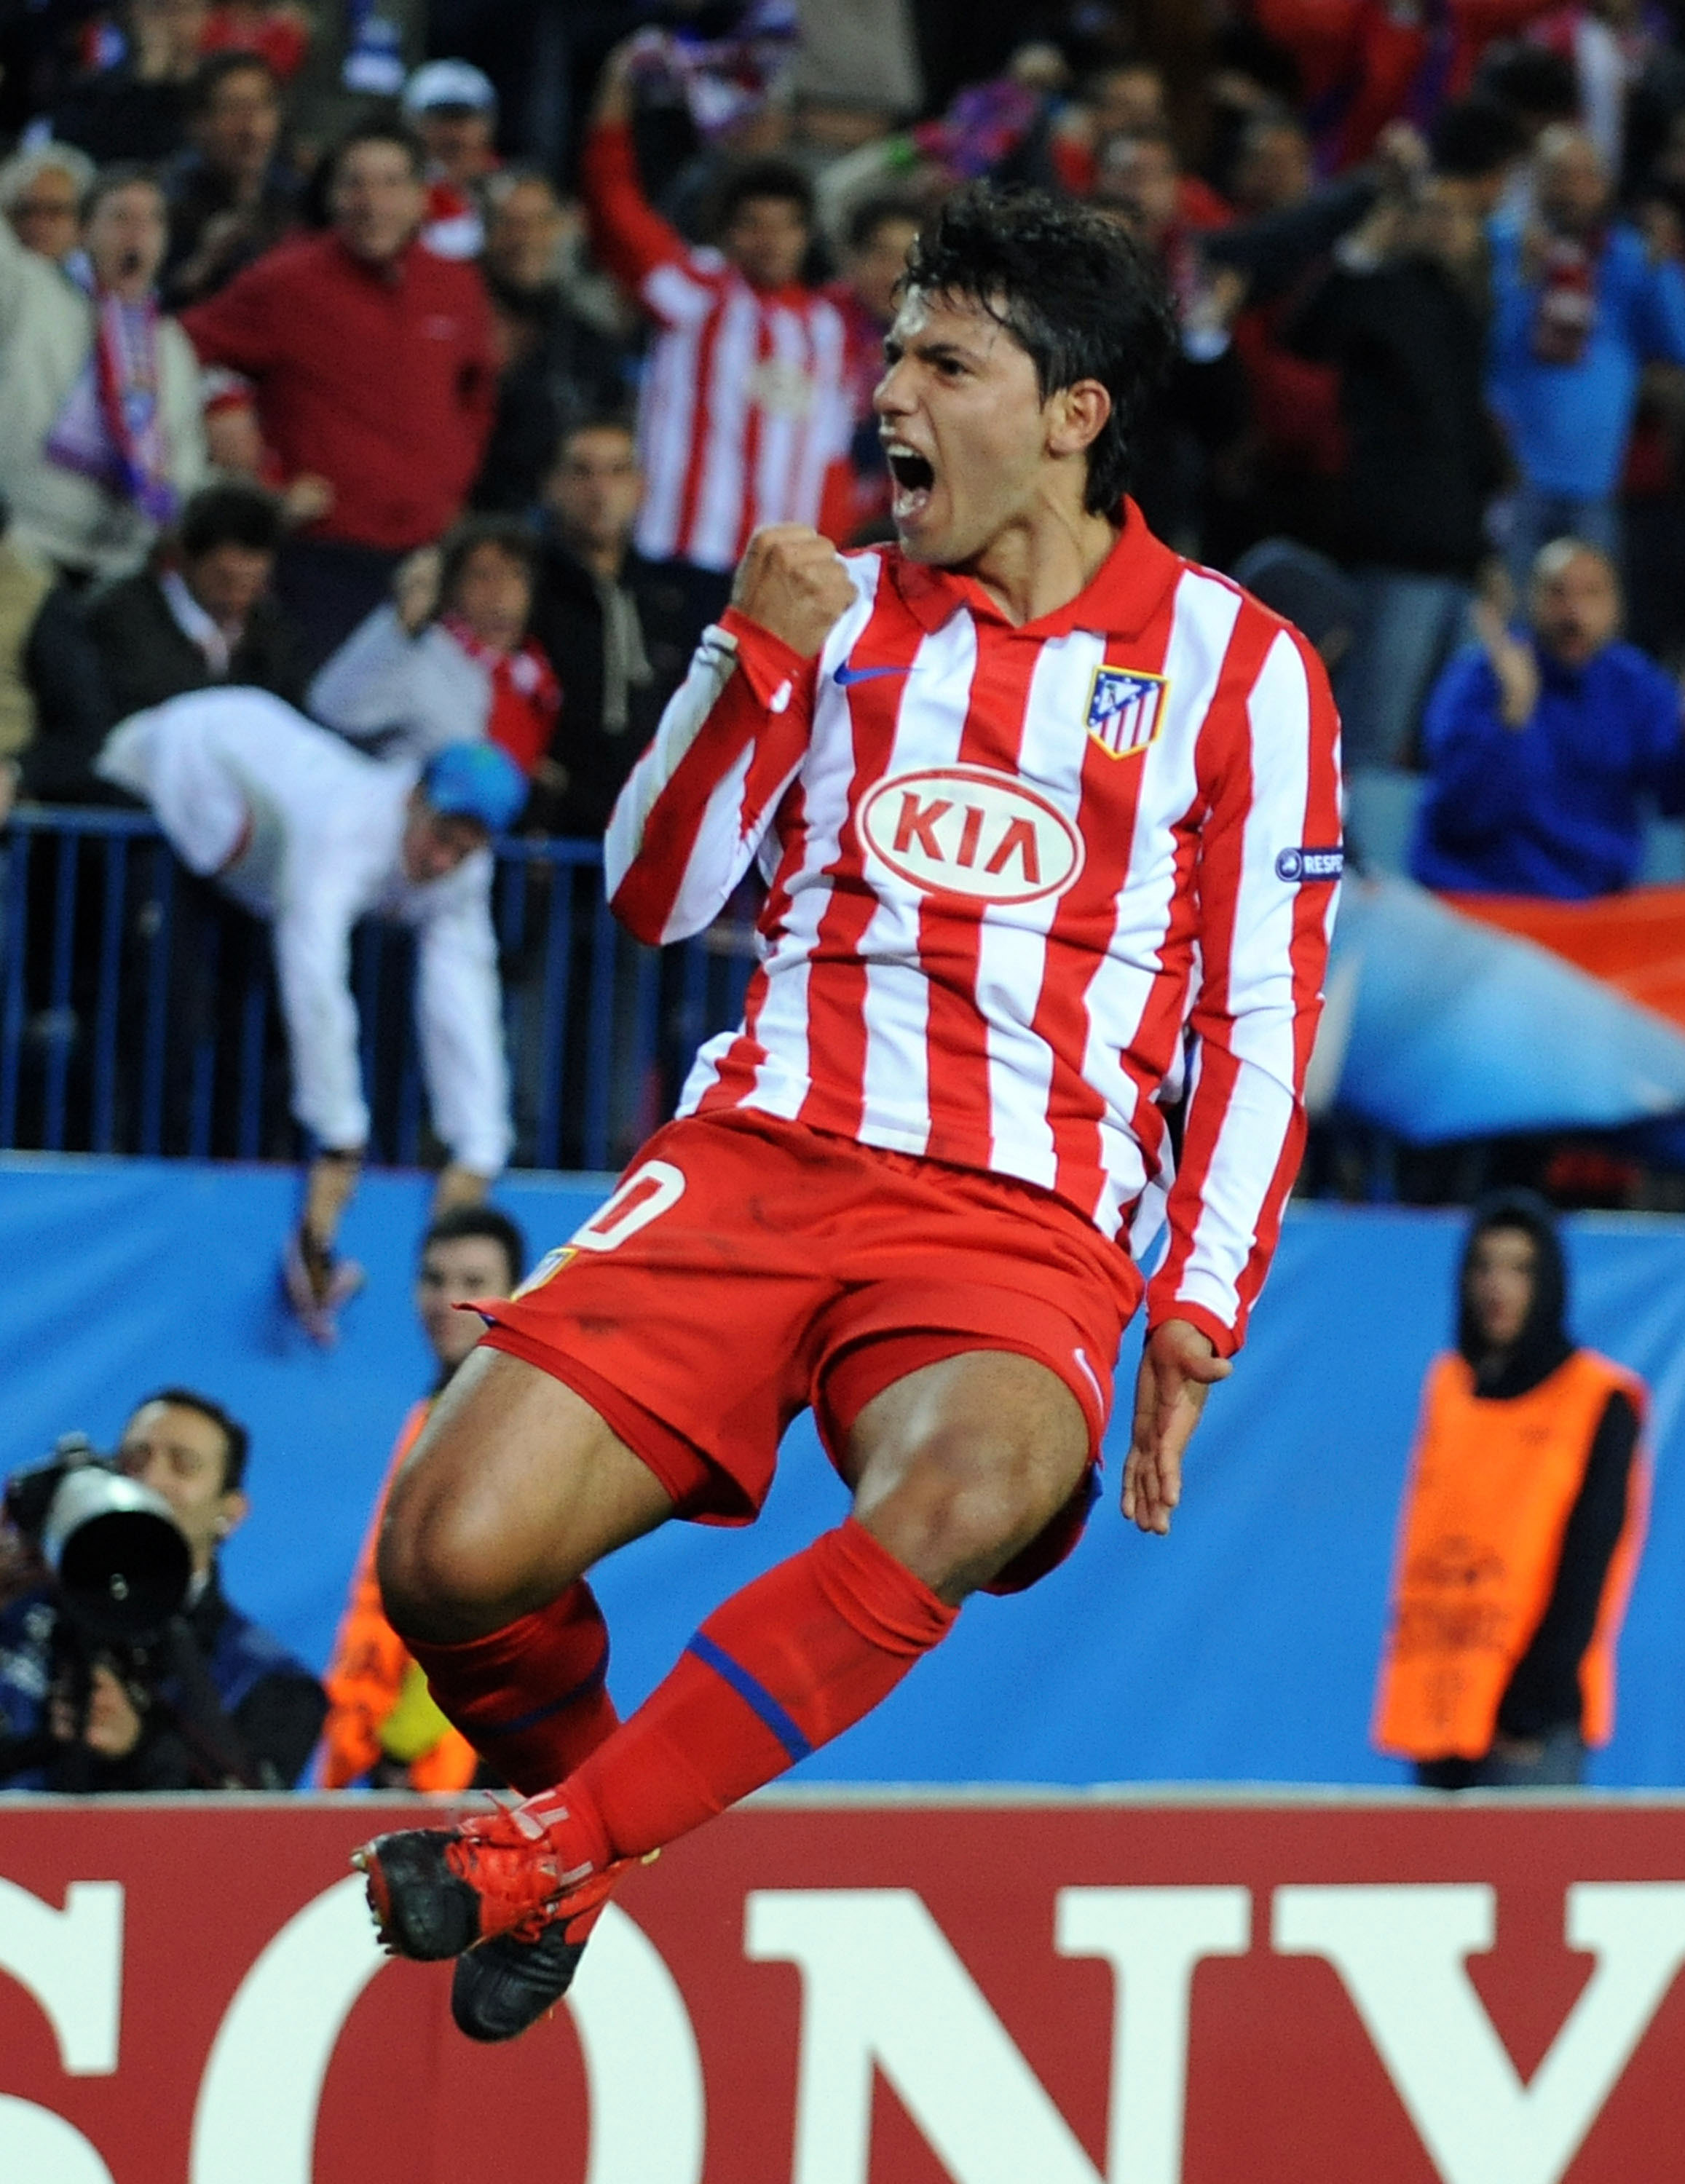 MADRID, SPAIN - NOVEMBER 03: Sergio Aguero of Atletico Madrid celebrates after scoring his second goal against Chelsea during the UEFA Champions League Group D match on November 3, 2009 in Madrid, Spain.  (Photo by Denis Doyle/Getty Images)